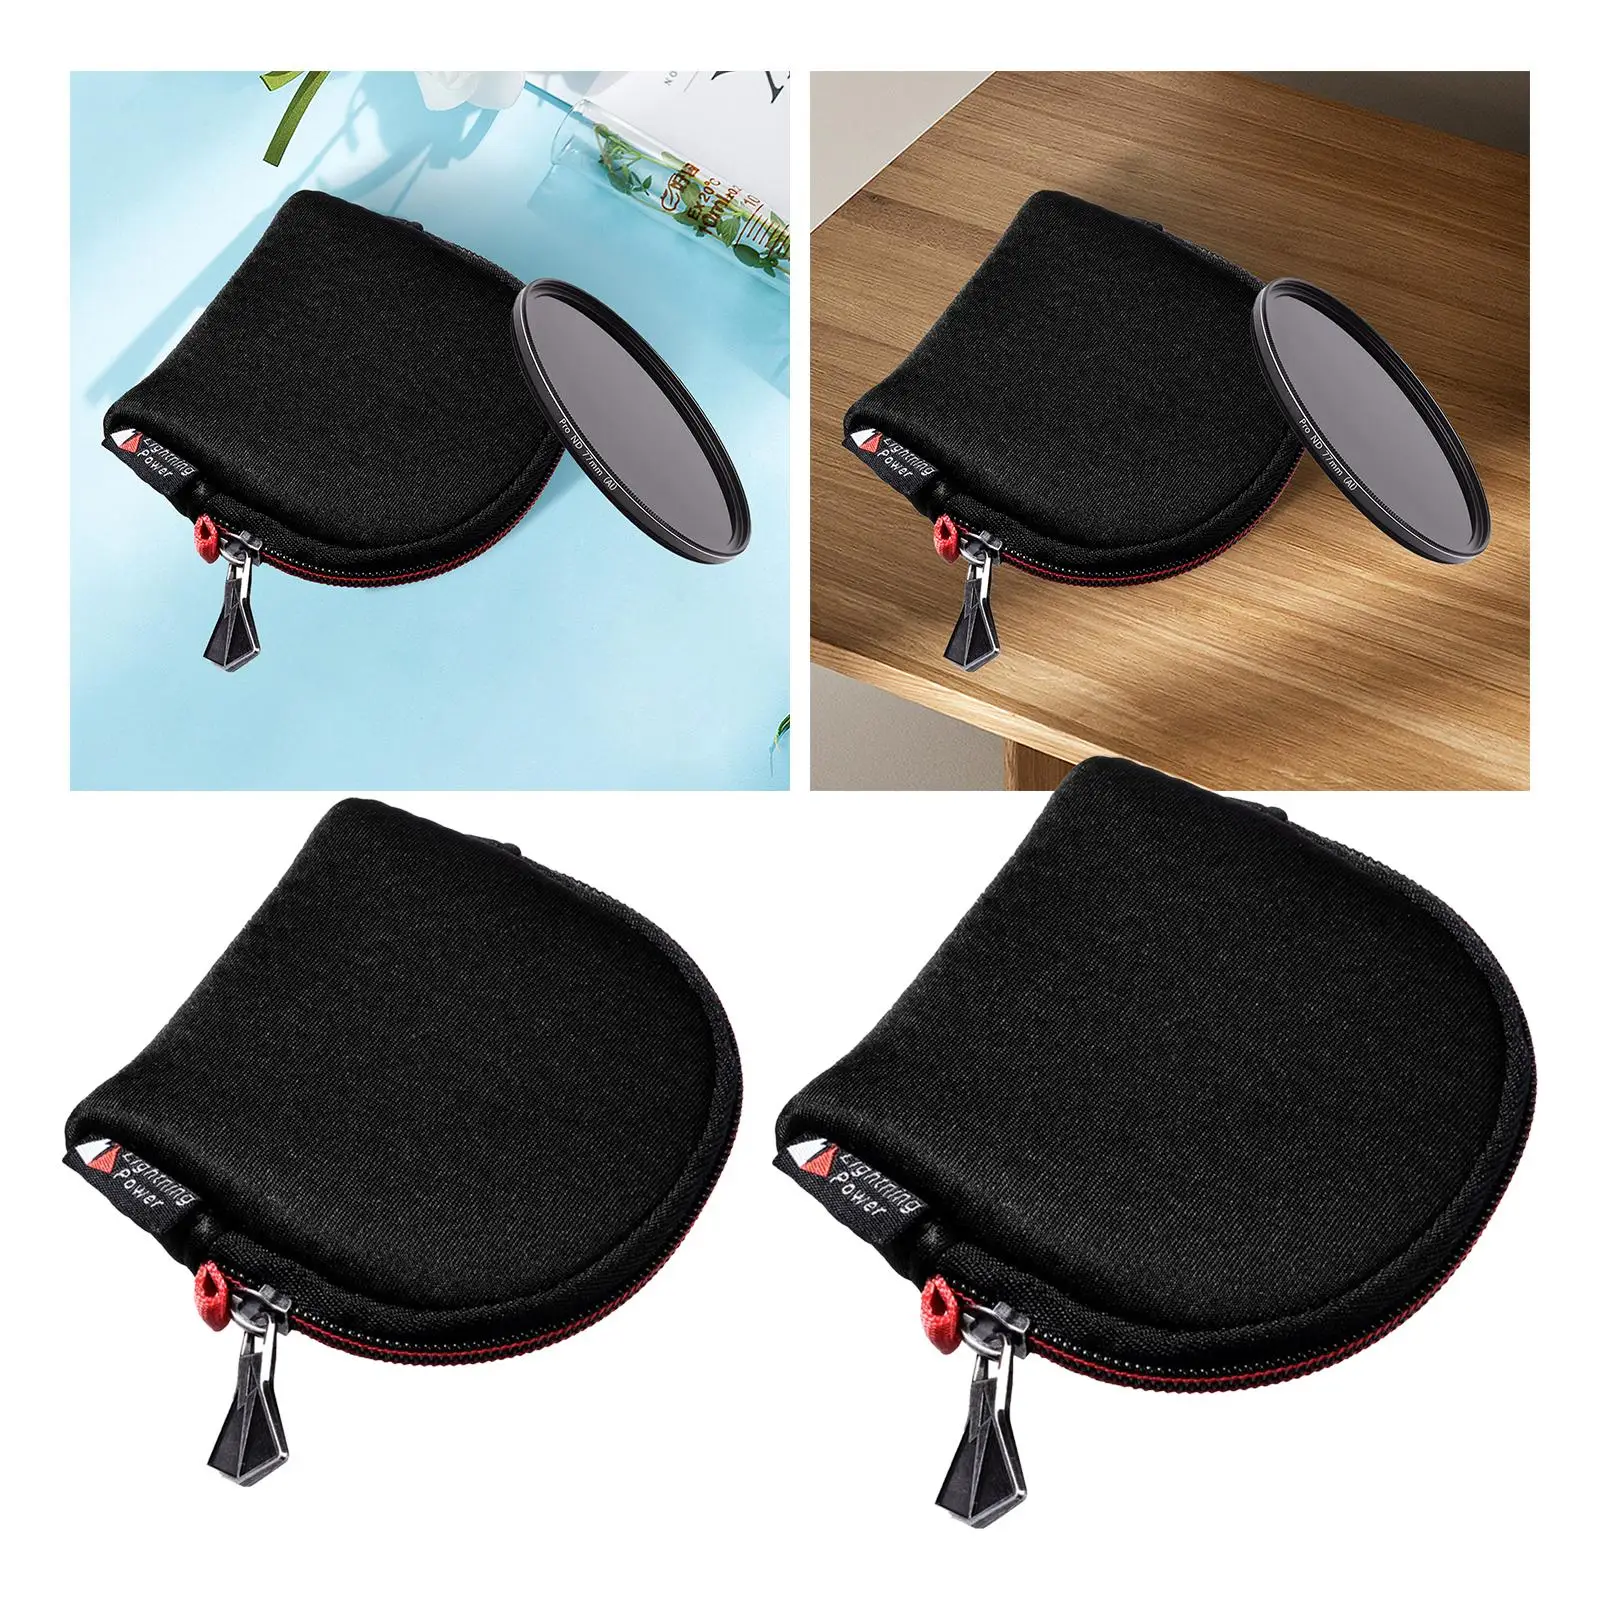 Filter Holder Professional Portable Outside Waterproof Accessories Travel Case Lightweight Camera Filter Pouch Lens Filter Case